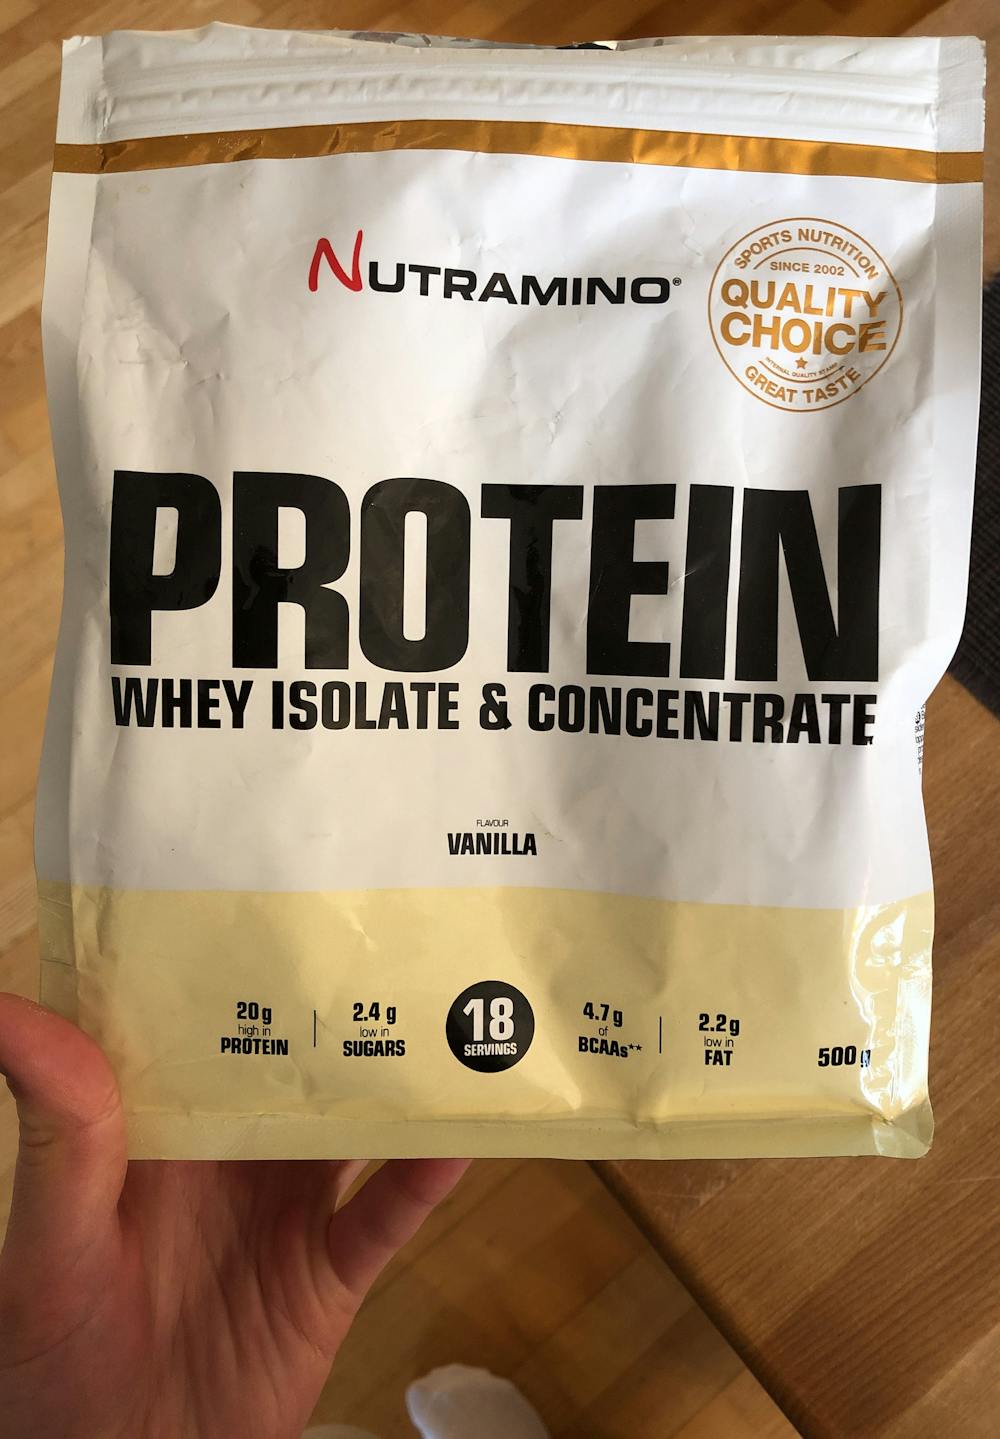 Protein whey isolate & concentrate, Nutramino